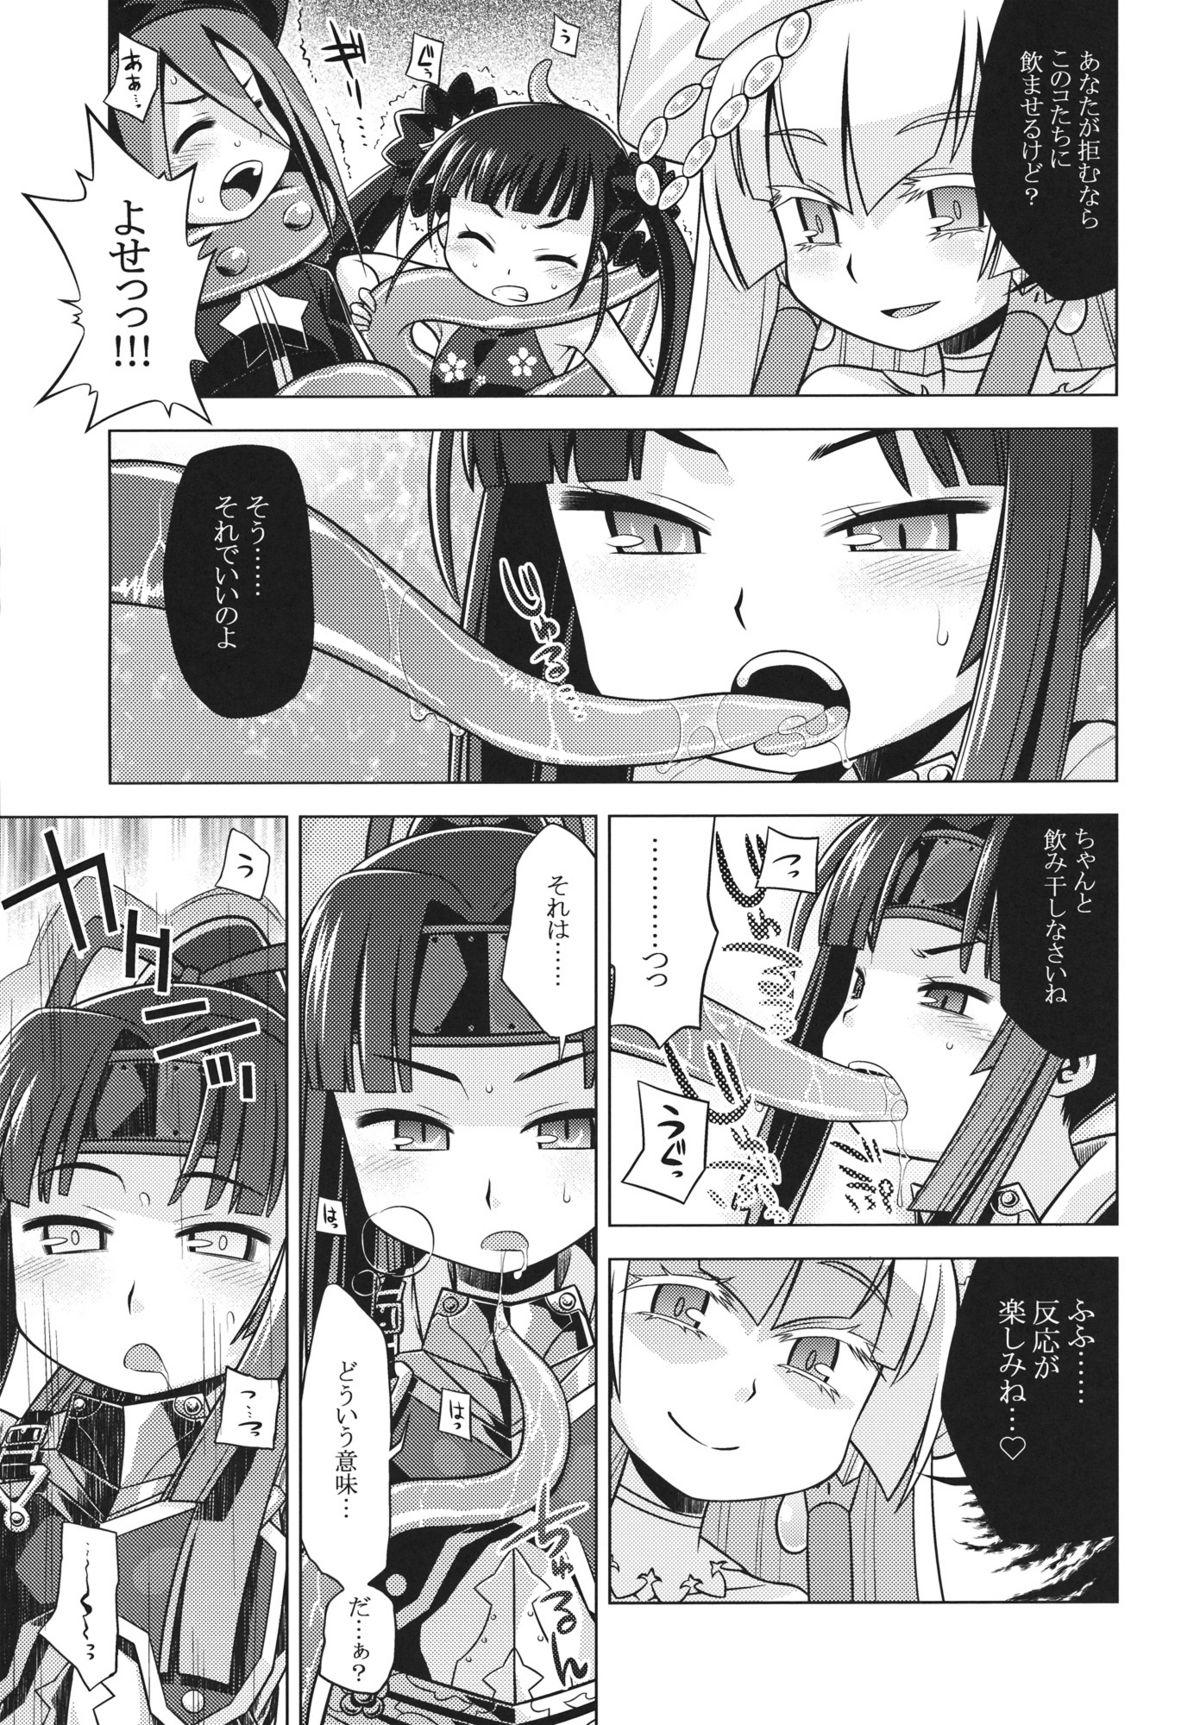 Pica Sekaiju no Anone 20 - Etrian odyssey From - Page 7